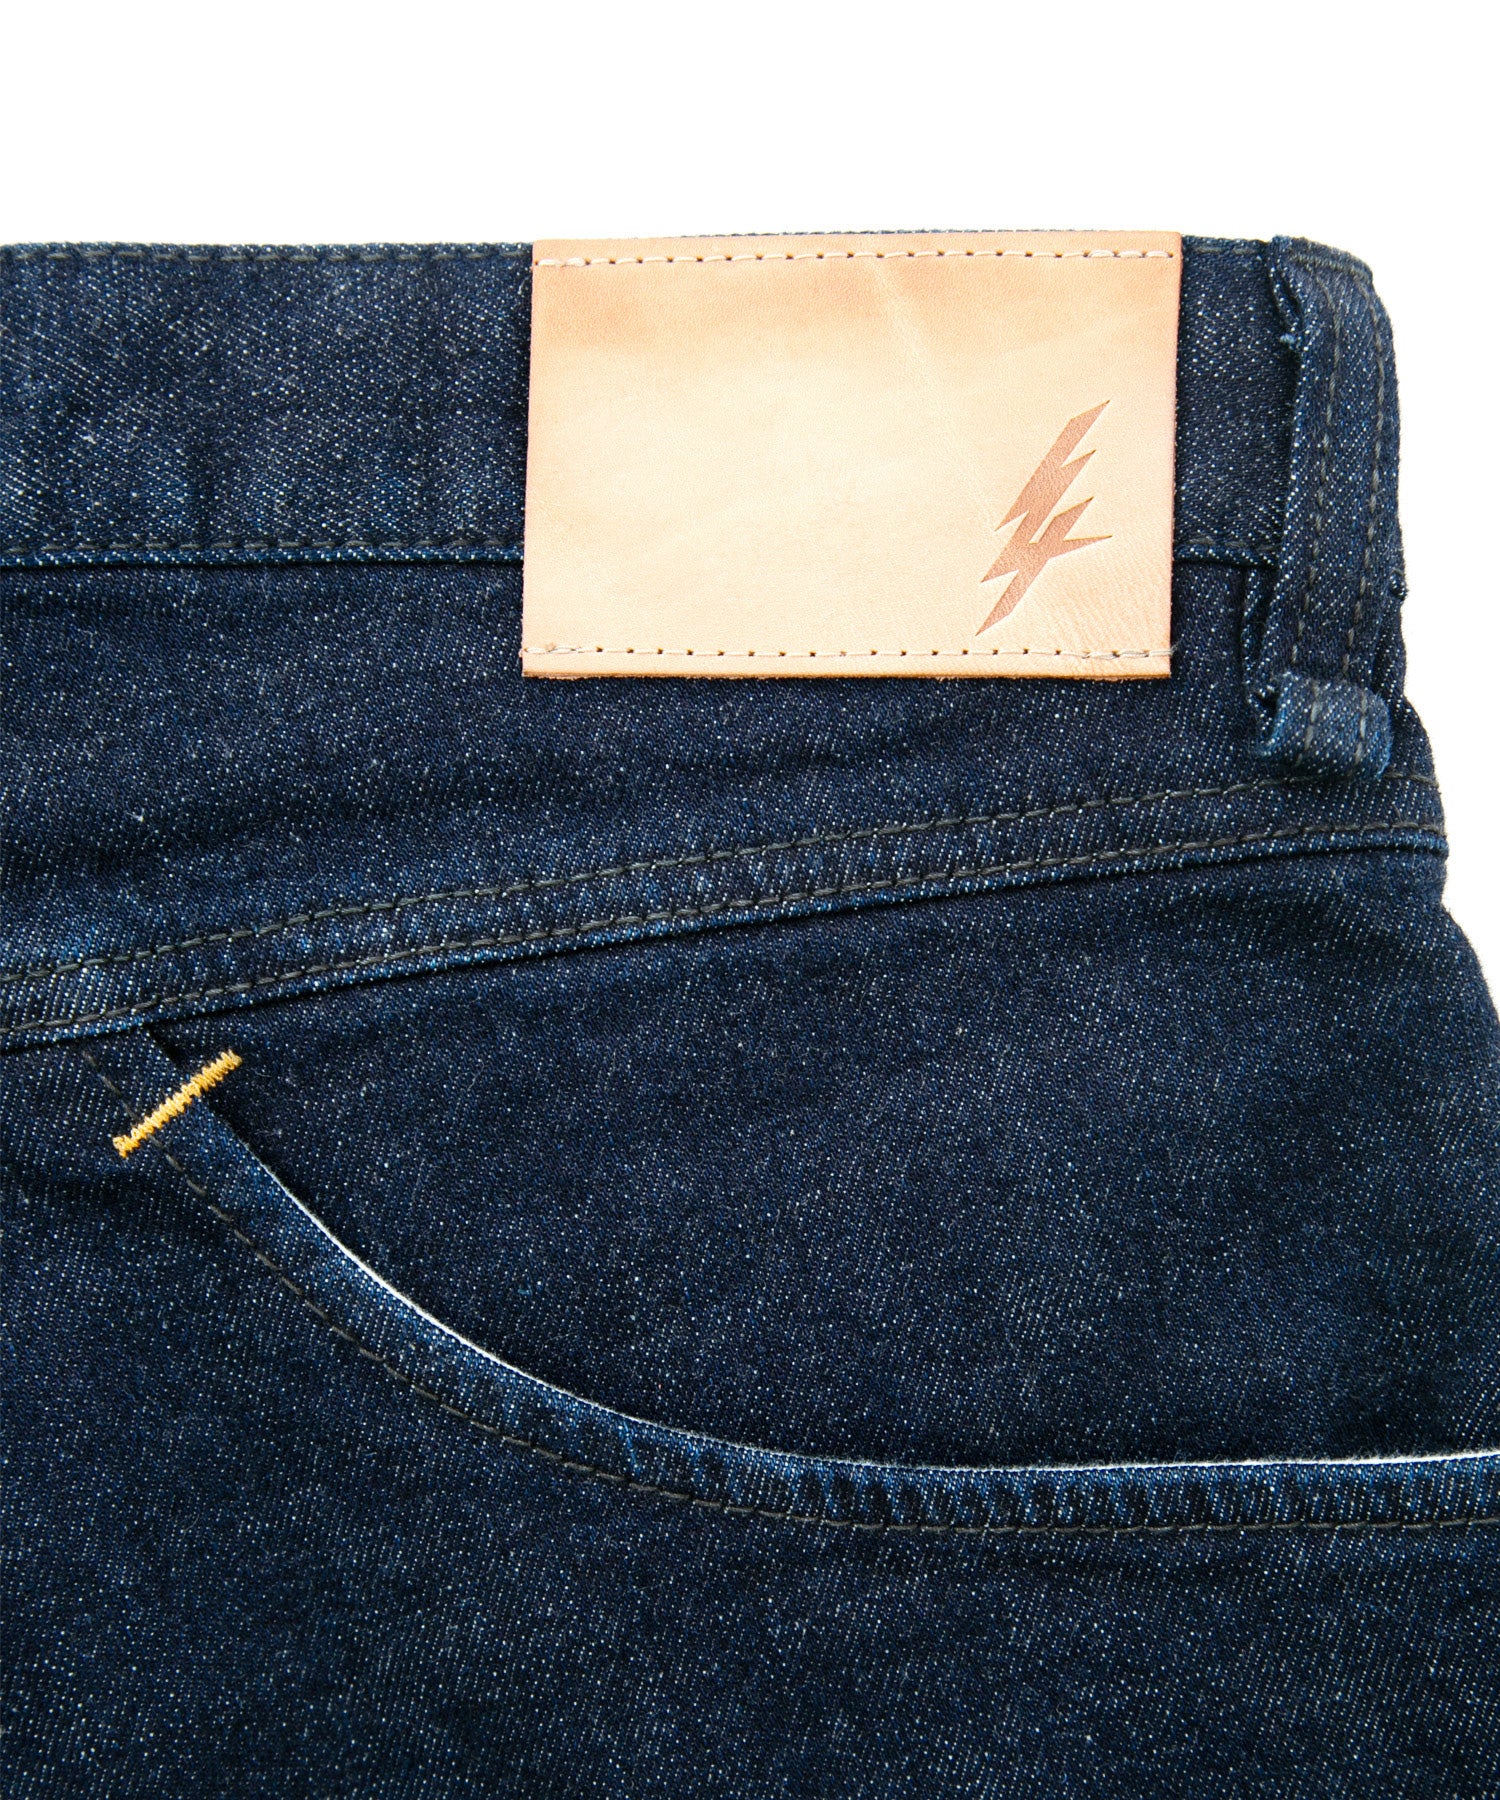 Load image into Gallery viewer, 12.5oz Organic Cotton Stretch Denim Cropped Jeans One Wash / INDIGO